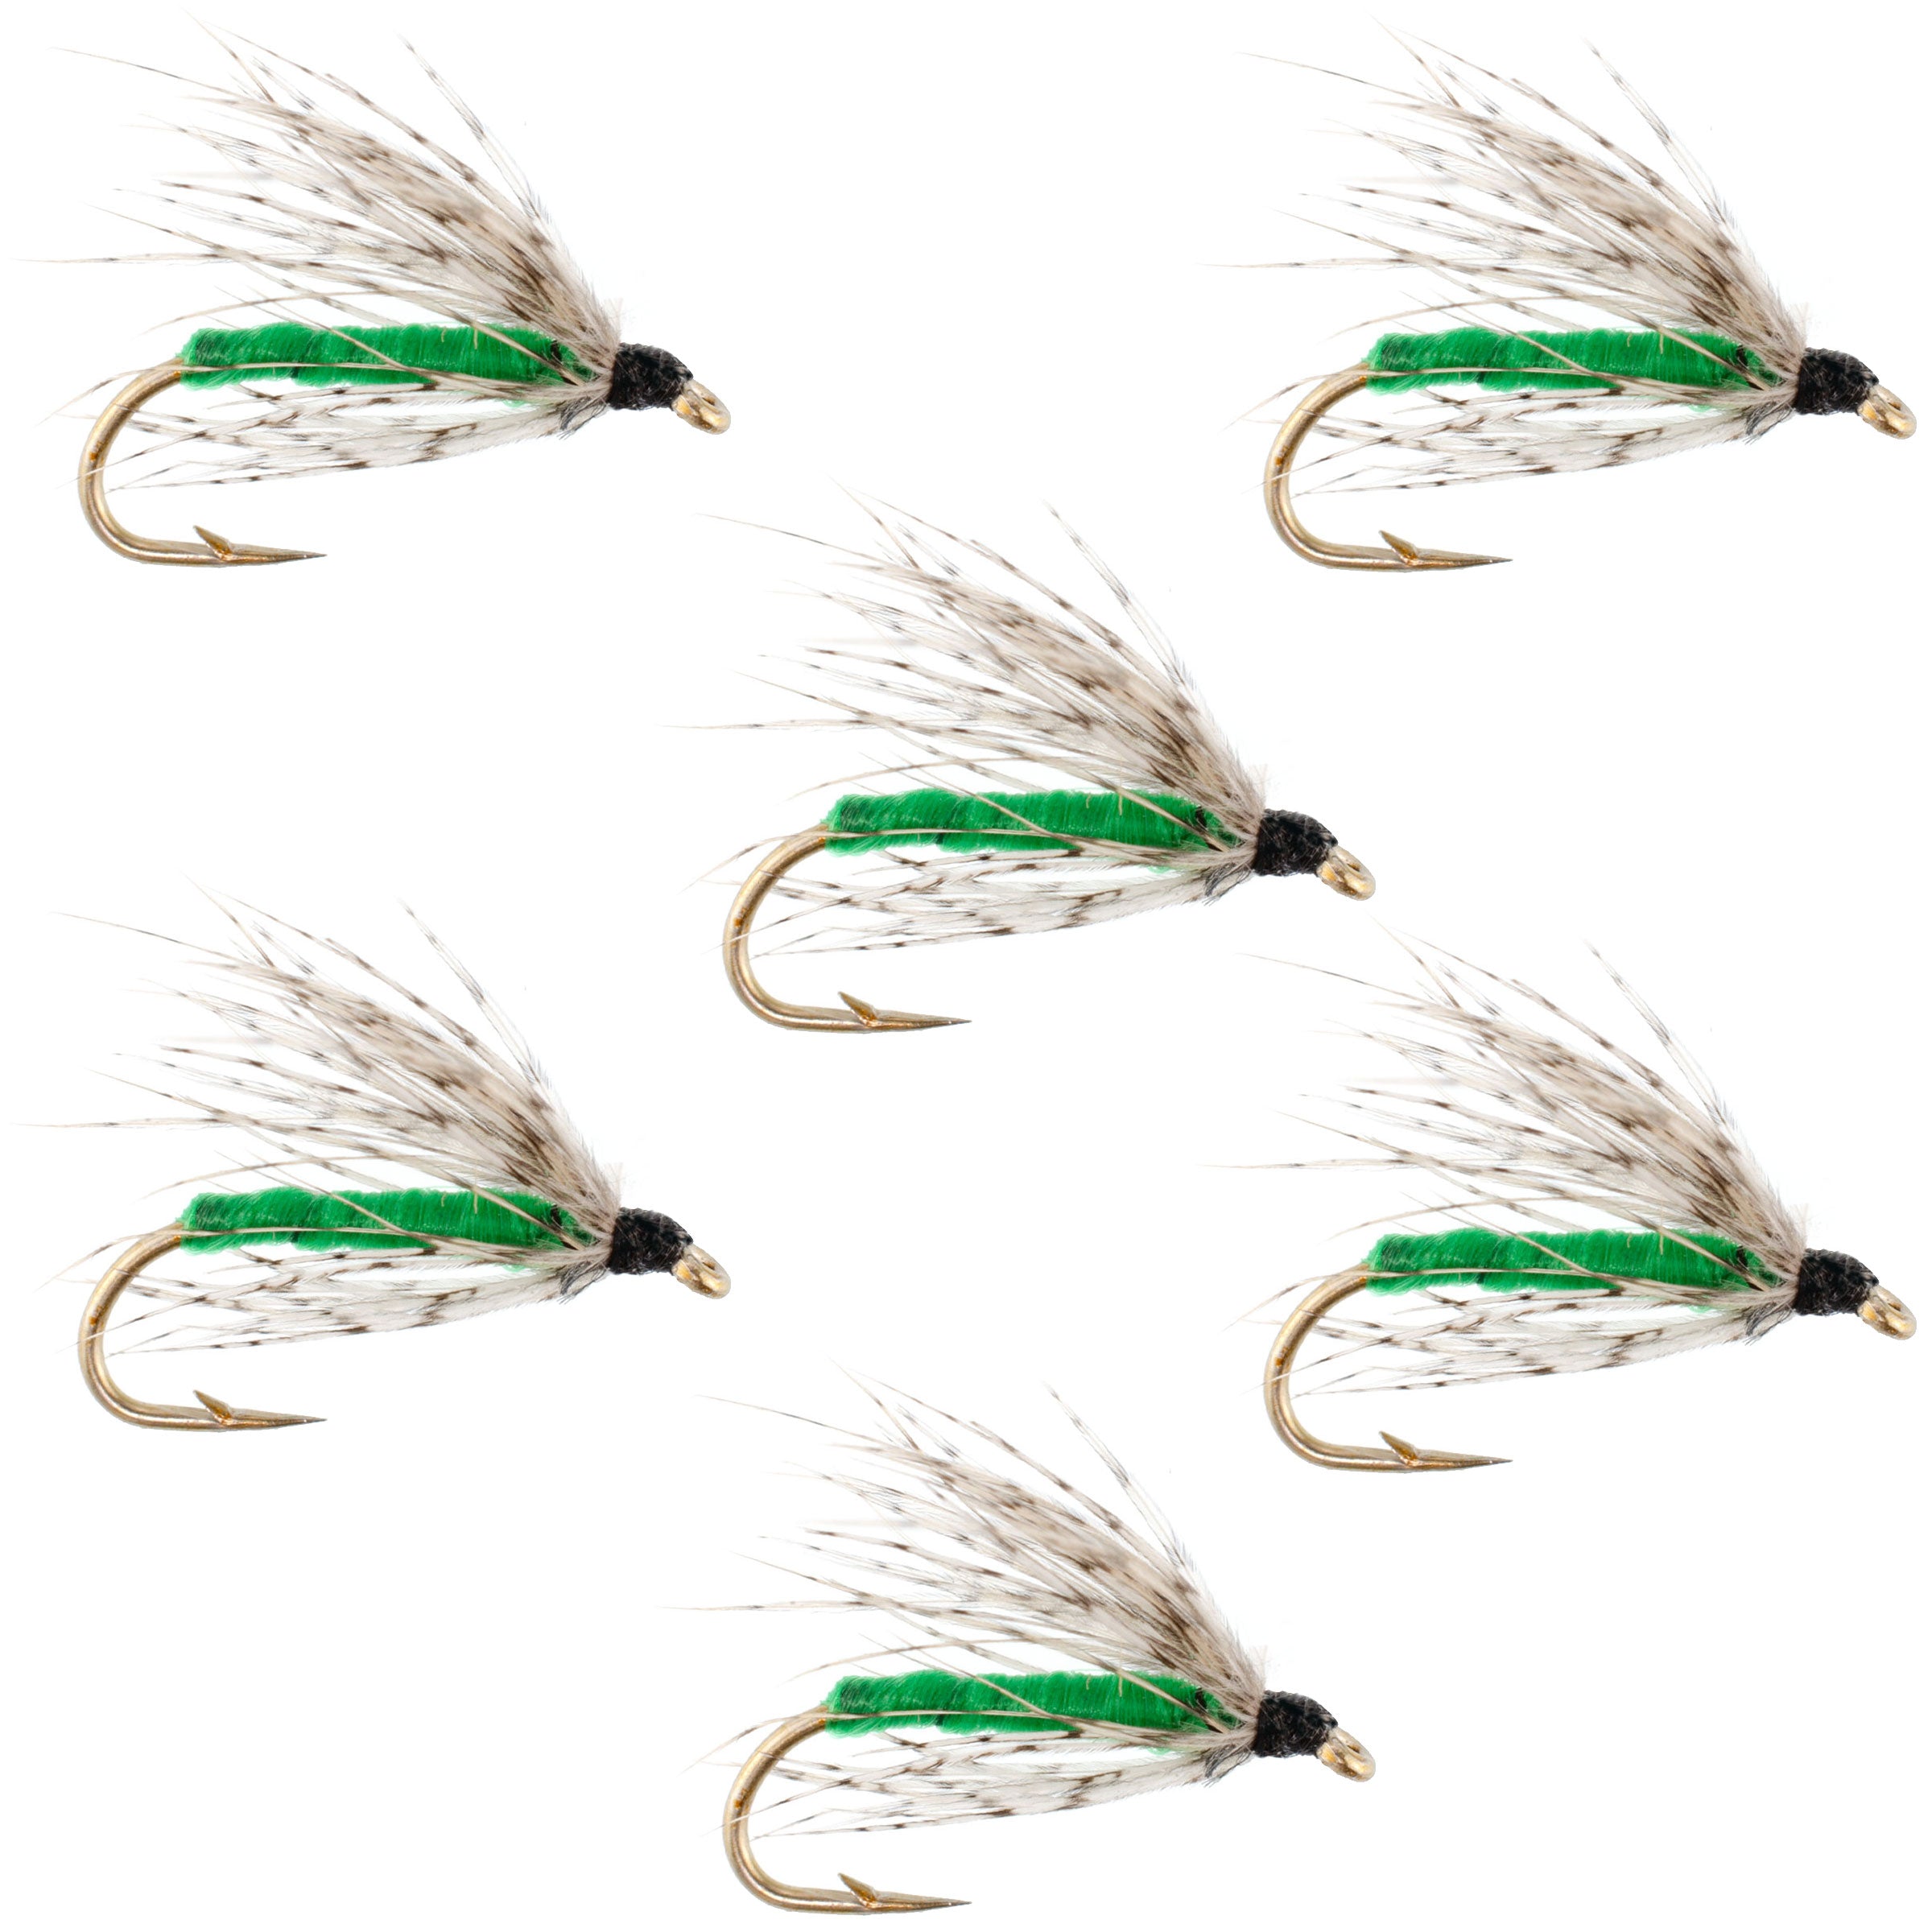 Soft Hackle Partridge and Green Fly Fishing Wet Flies - 6 Flies Hook Size 12